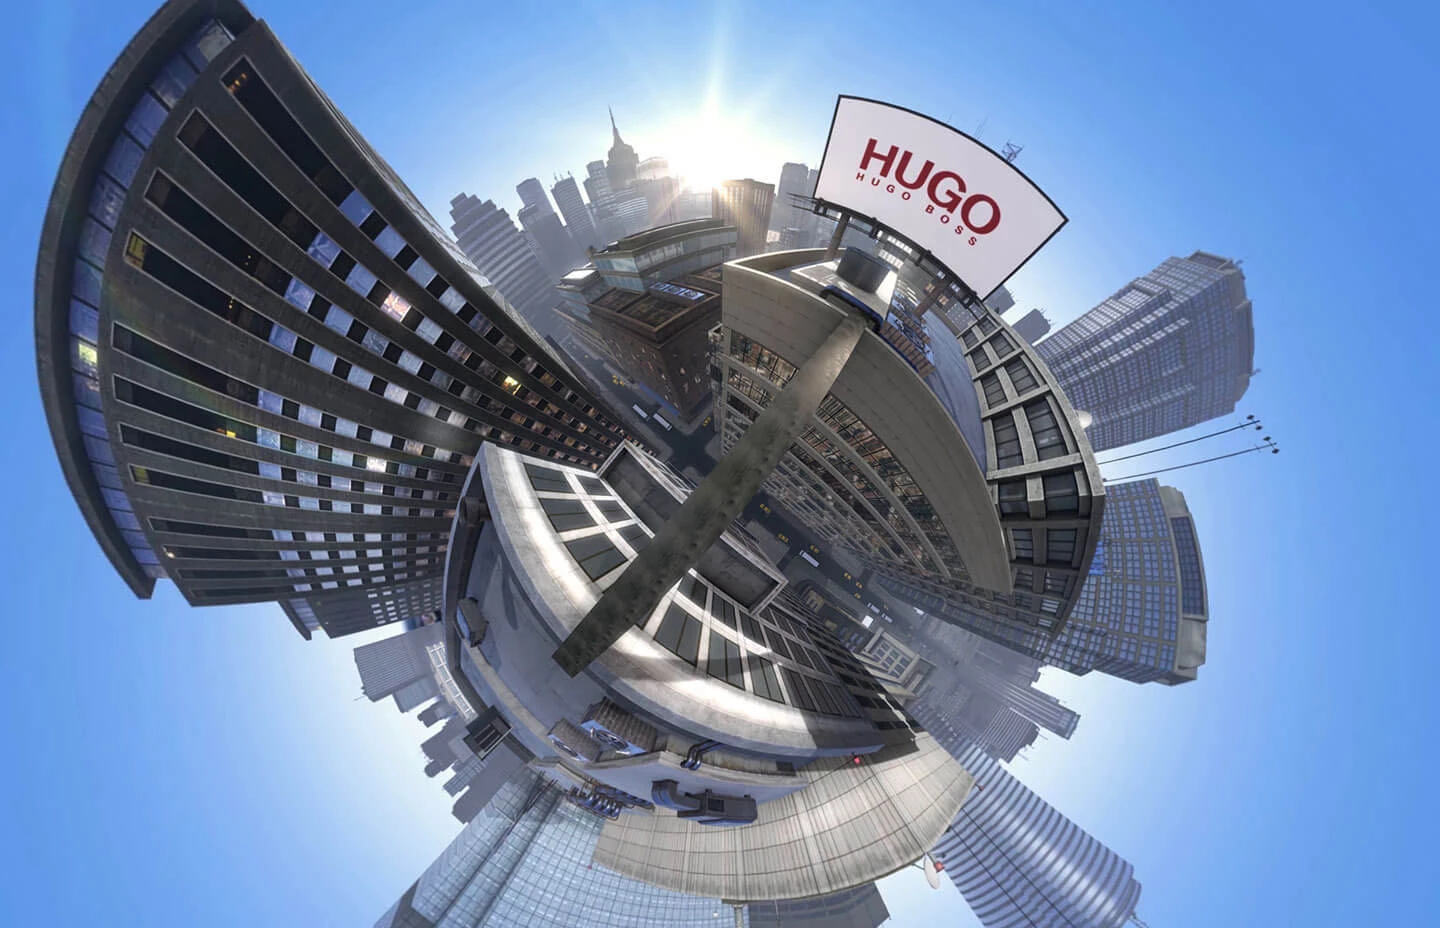 360 image of cityscape with HUGO BOSS billboard on top of a building